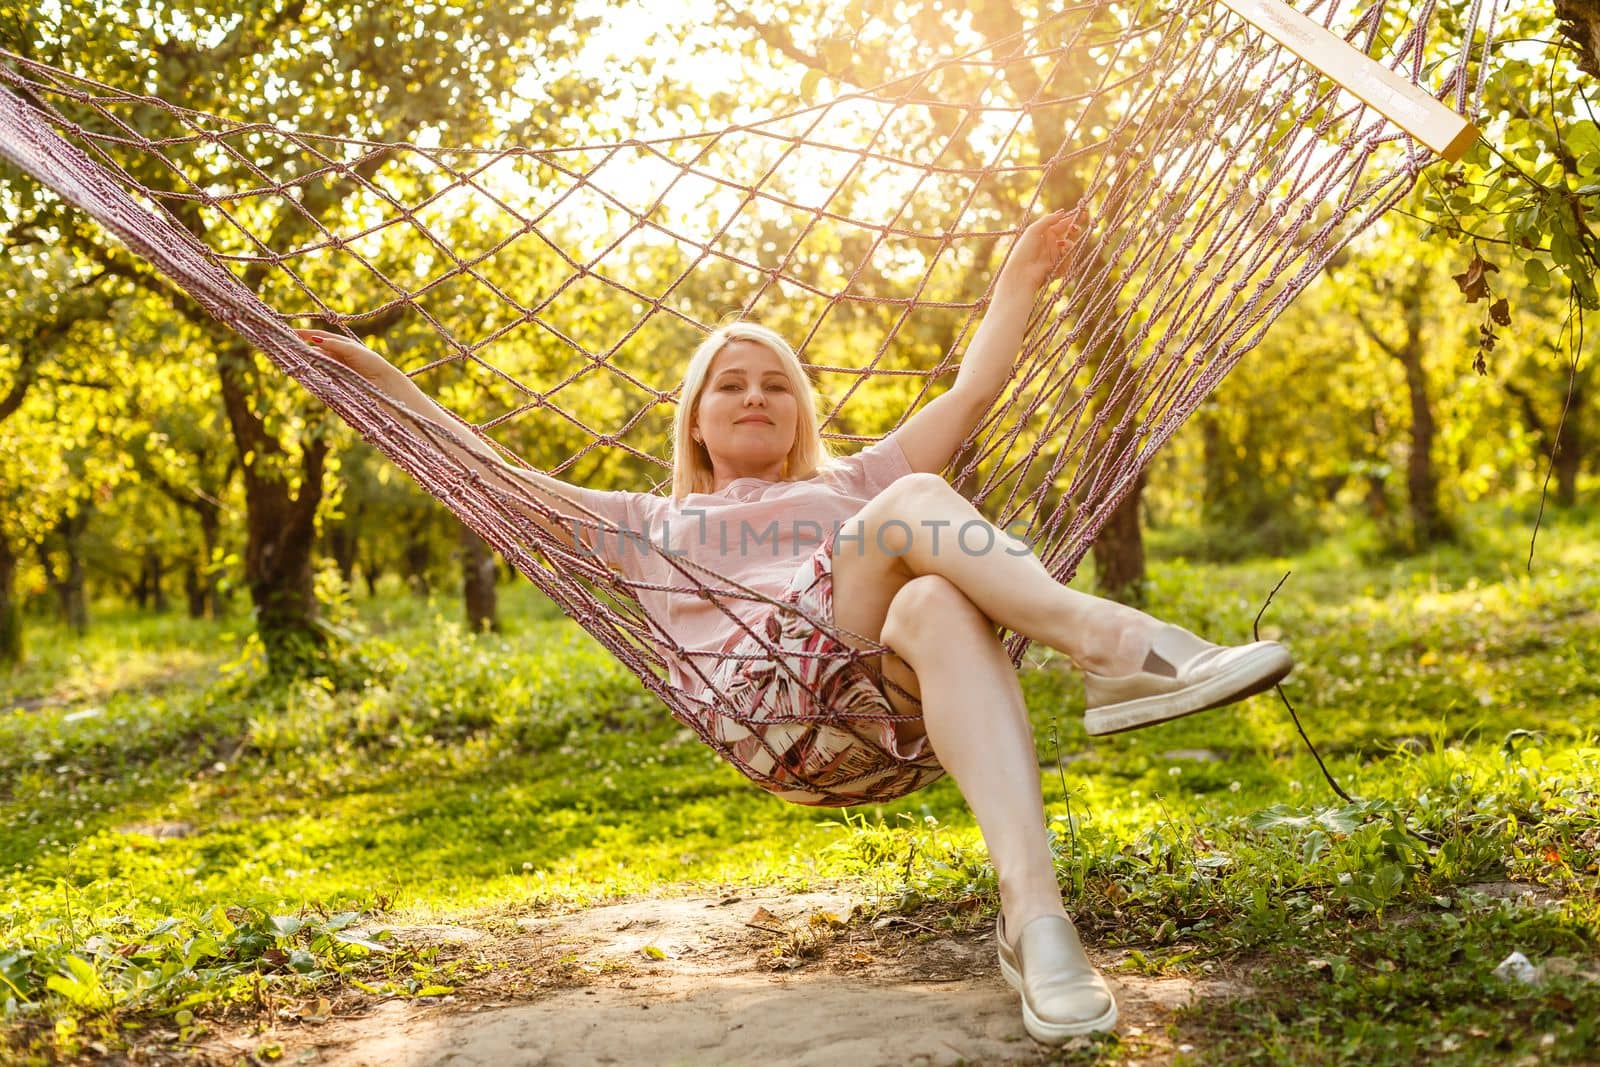 Smiling blonde woman relaxing on the hammock in garden, leisure time and summer holiday concept by Andelov13